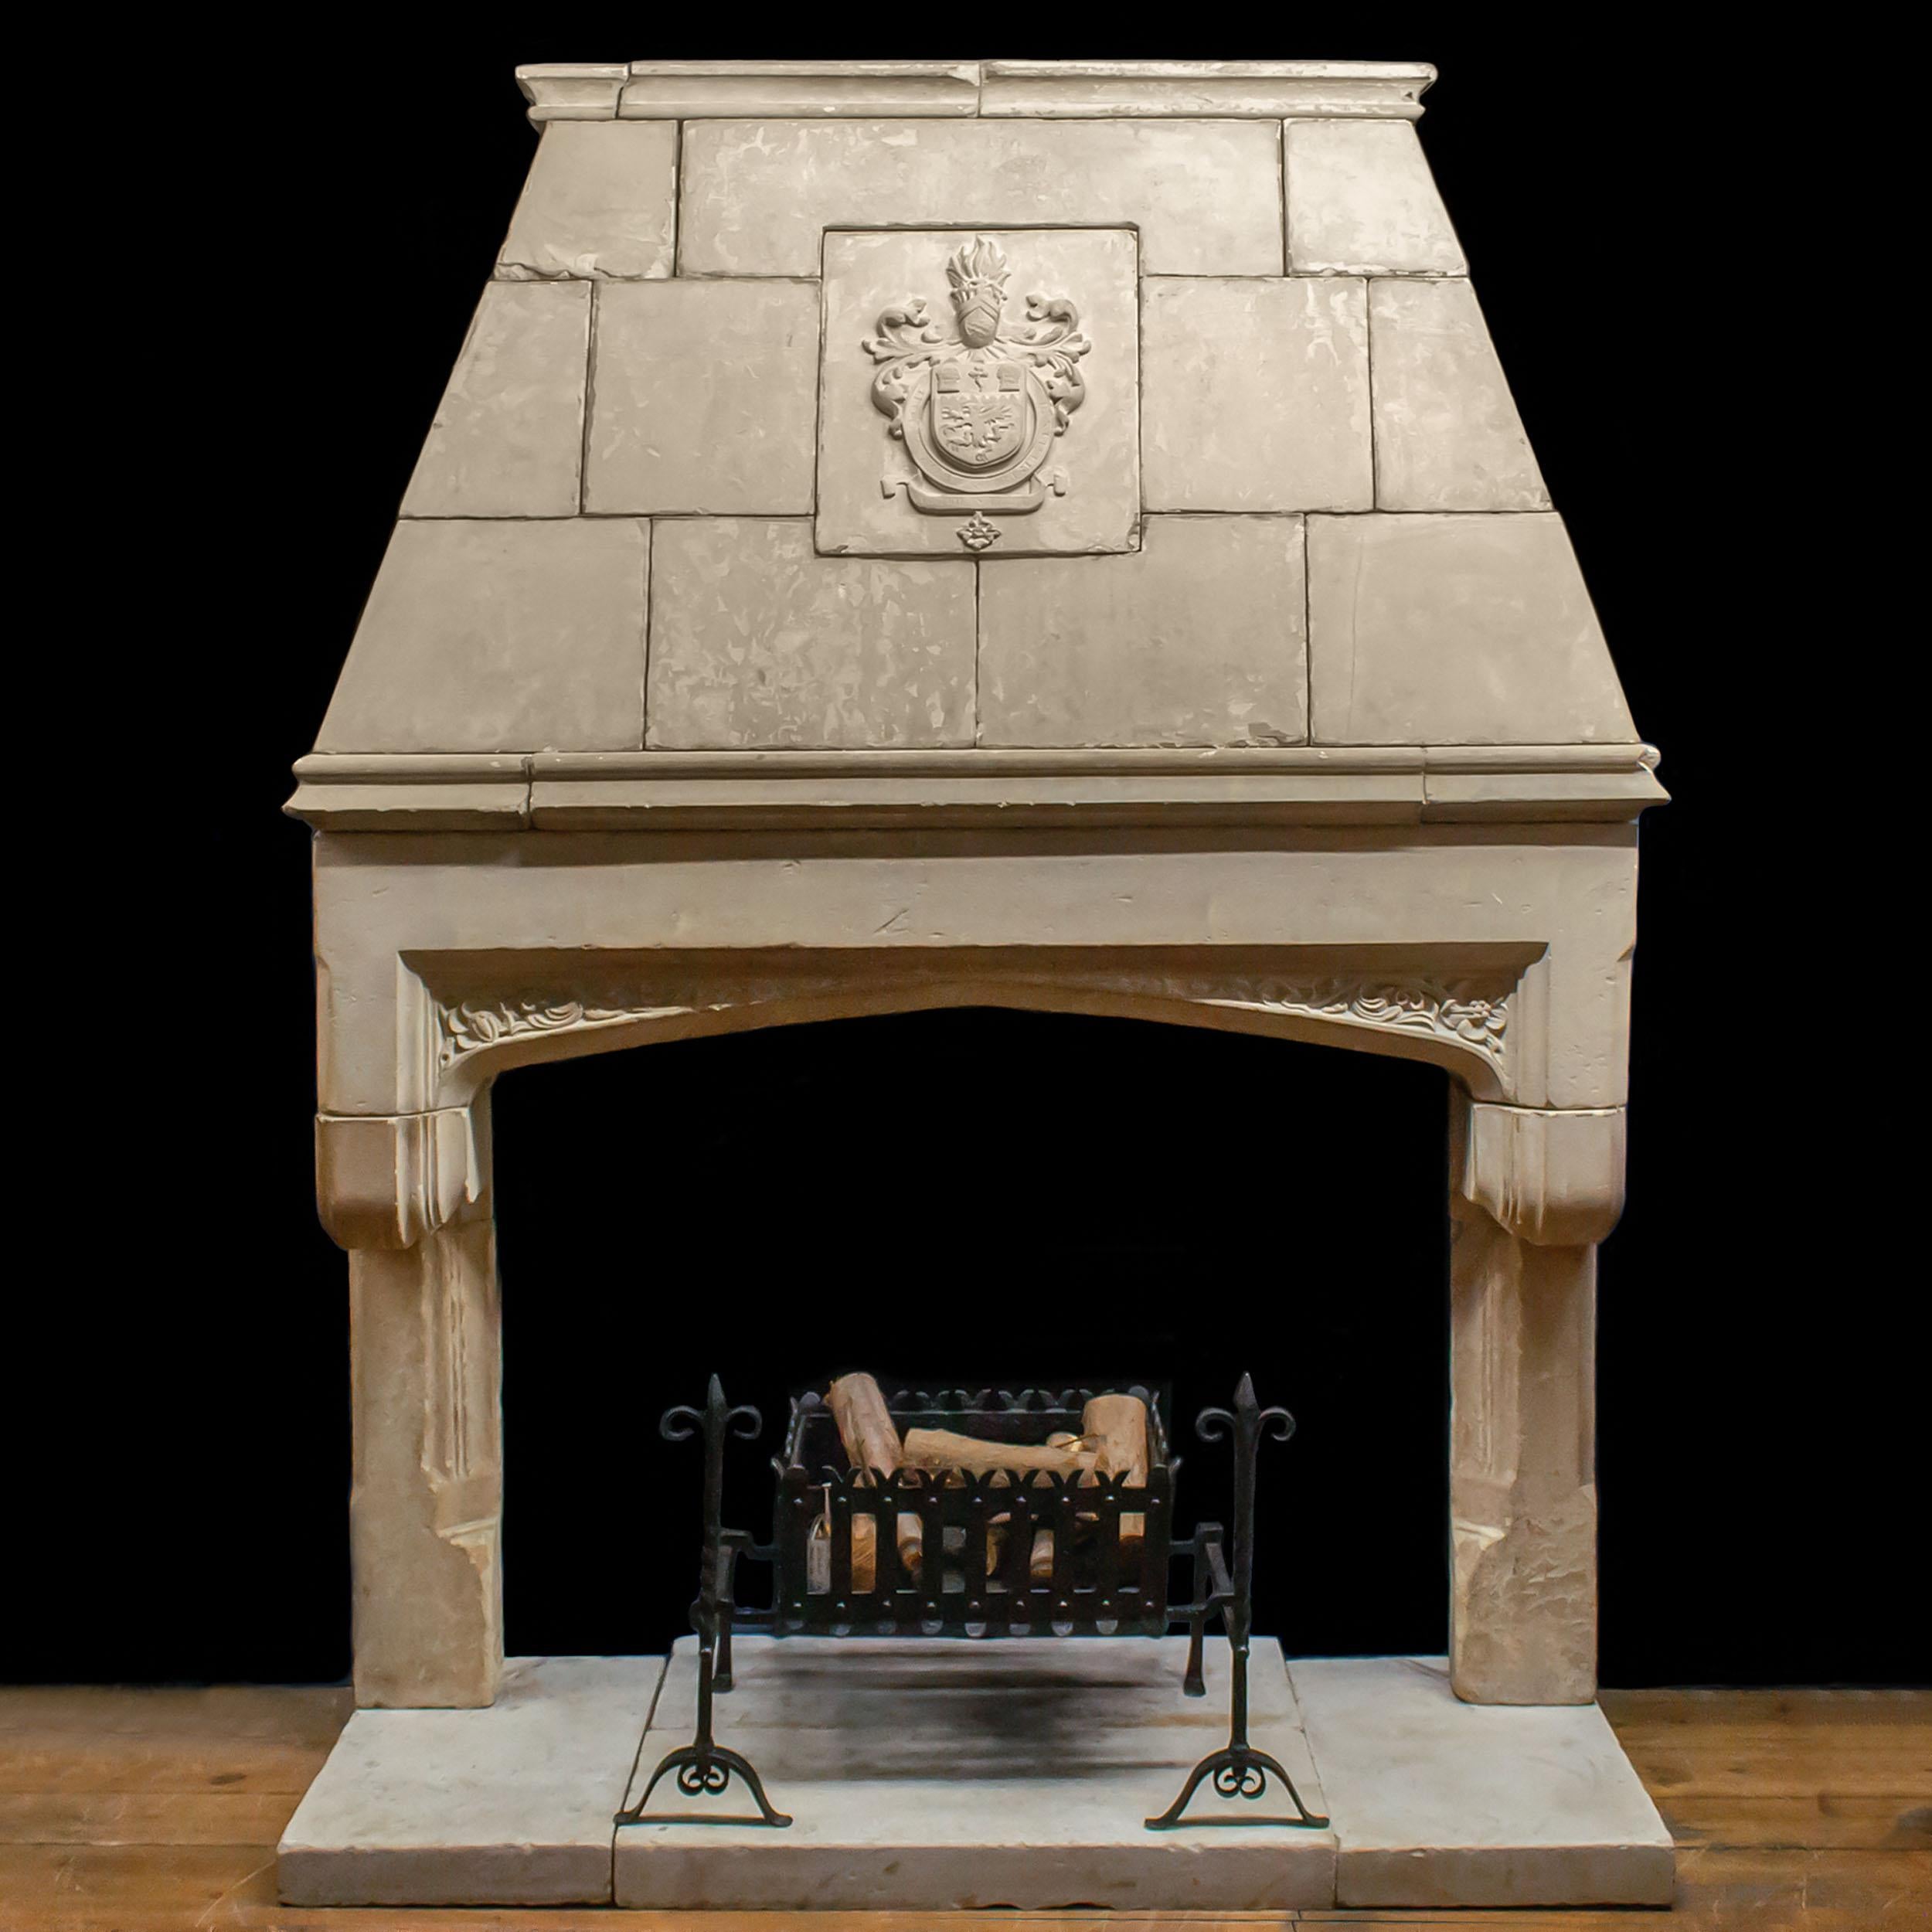 A grand and monumental early Victorian trumeau chimneypiece in the Renaissance Revival style. The blockwork trumeau is centred by an armorial and rests on a large freize carved with floral spandrels in the Tudor Revival style, over cantilevered,